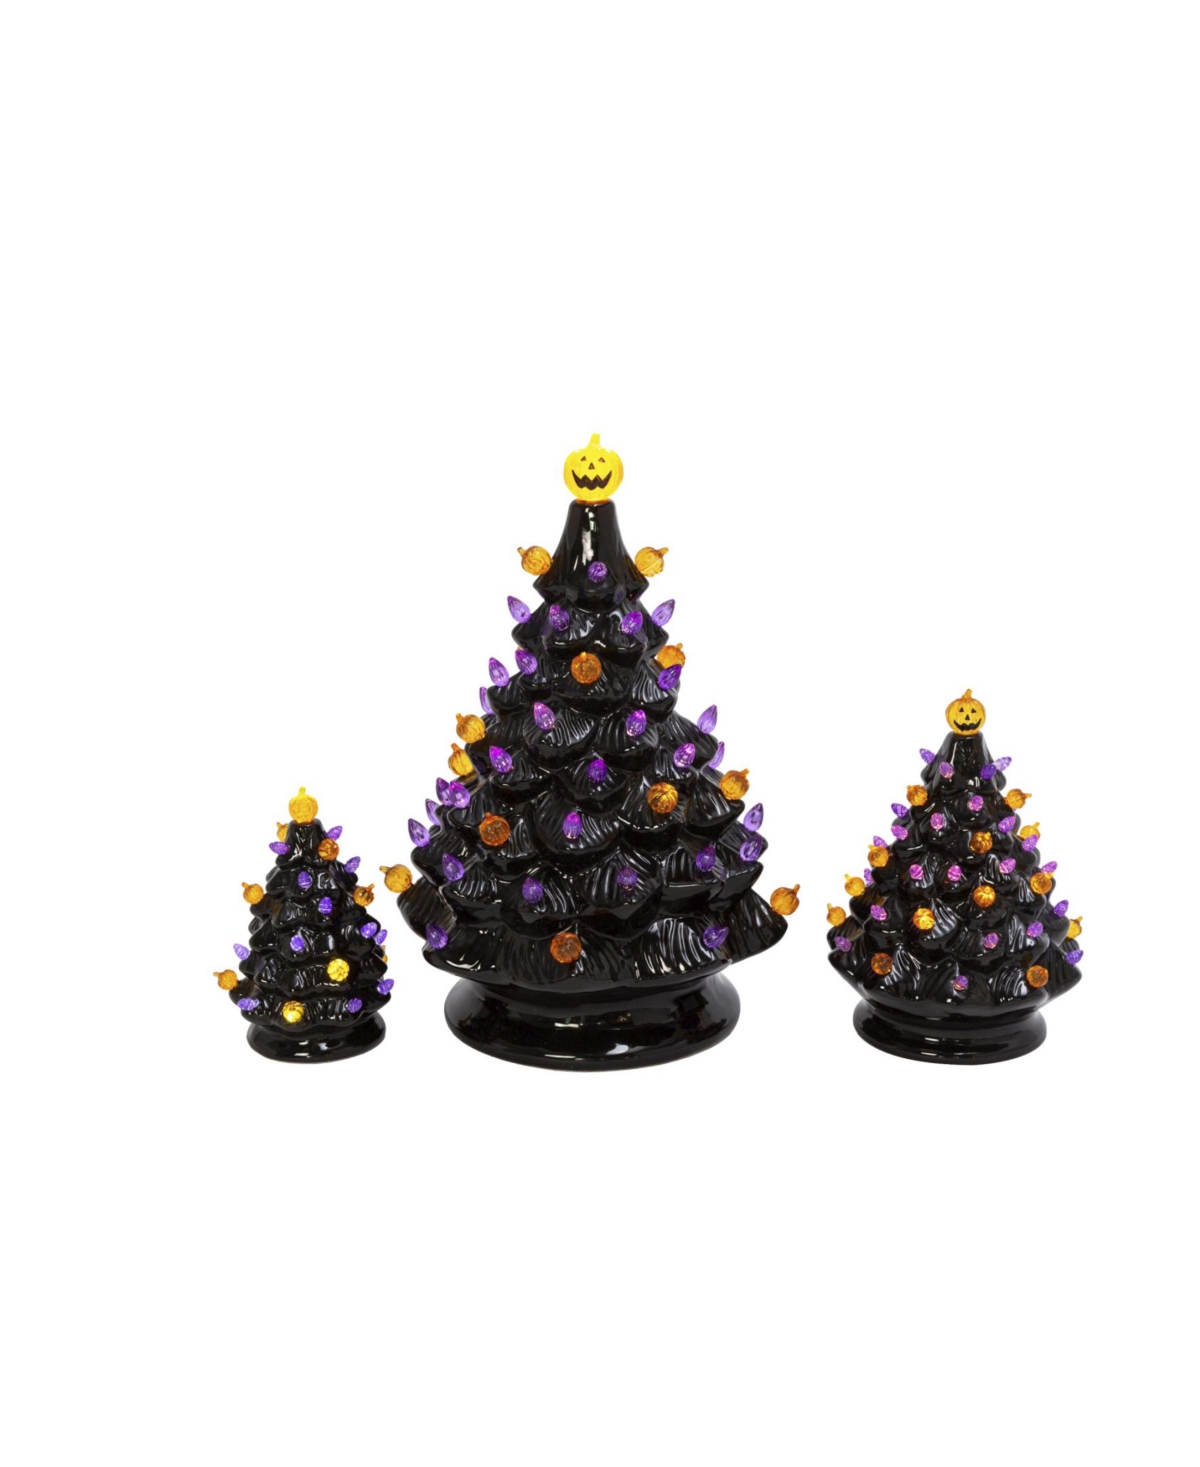 Battery Operated Lighted Dolomite Halloween Trees with Sound Set, 3 Pieces - Black